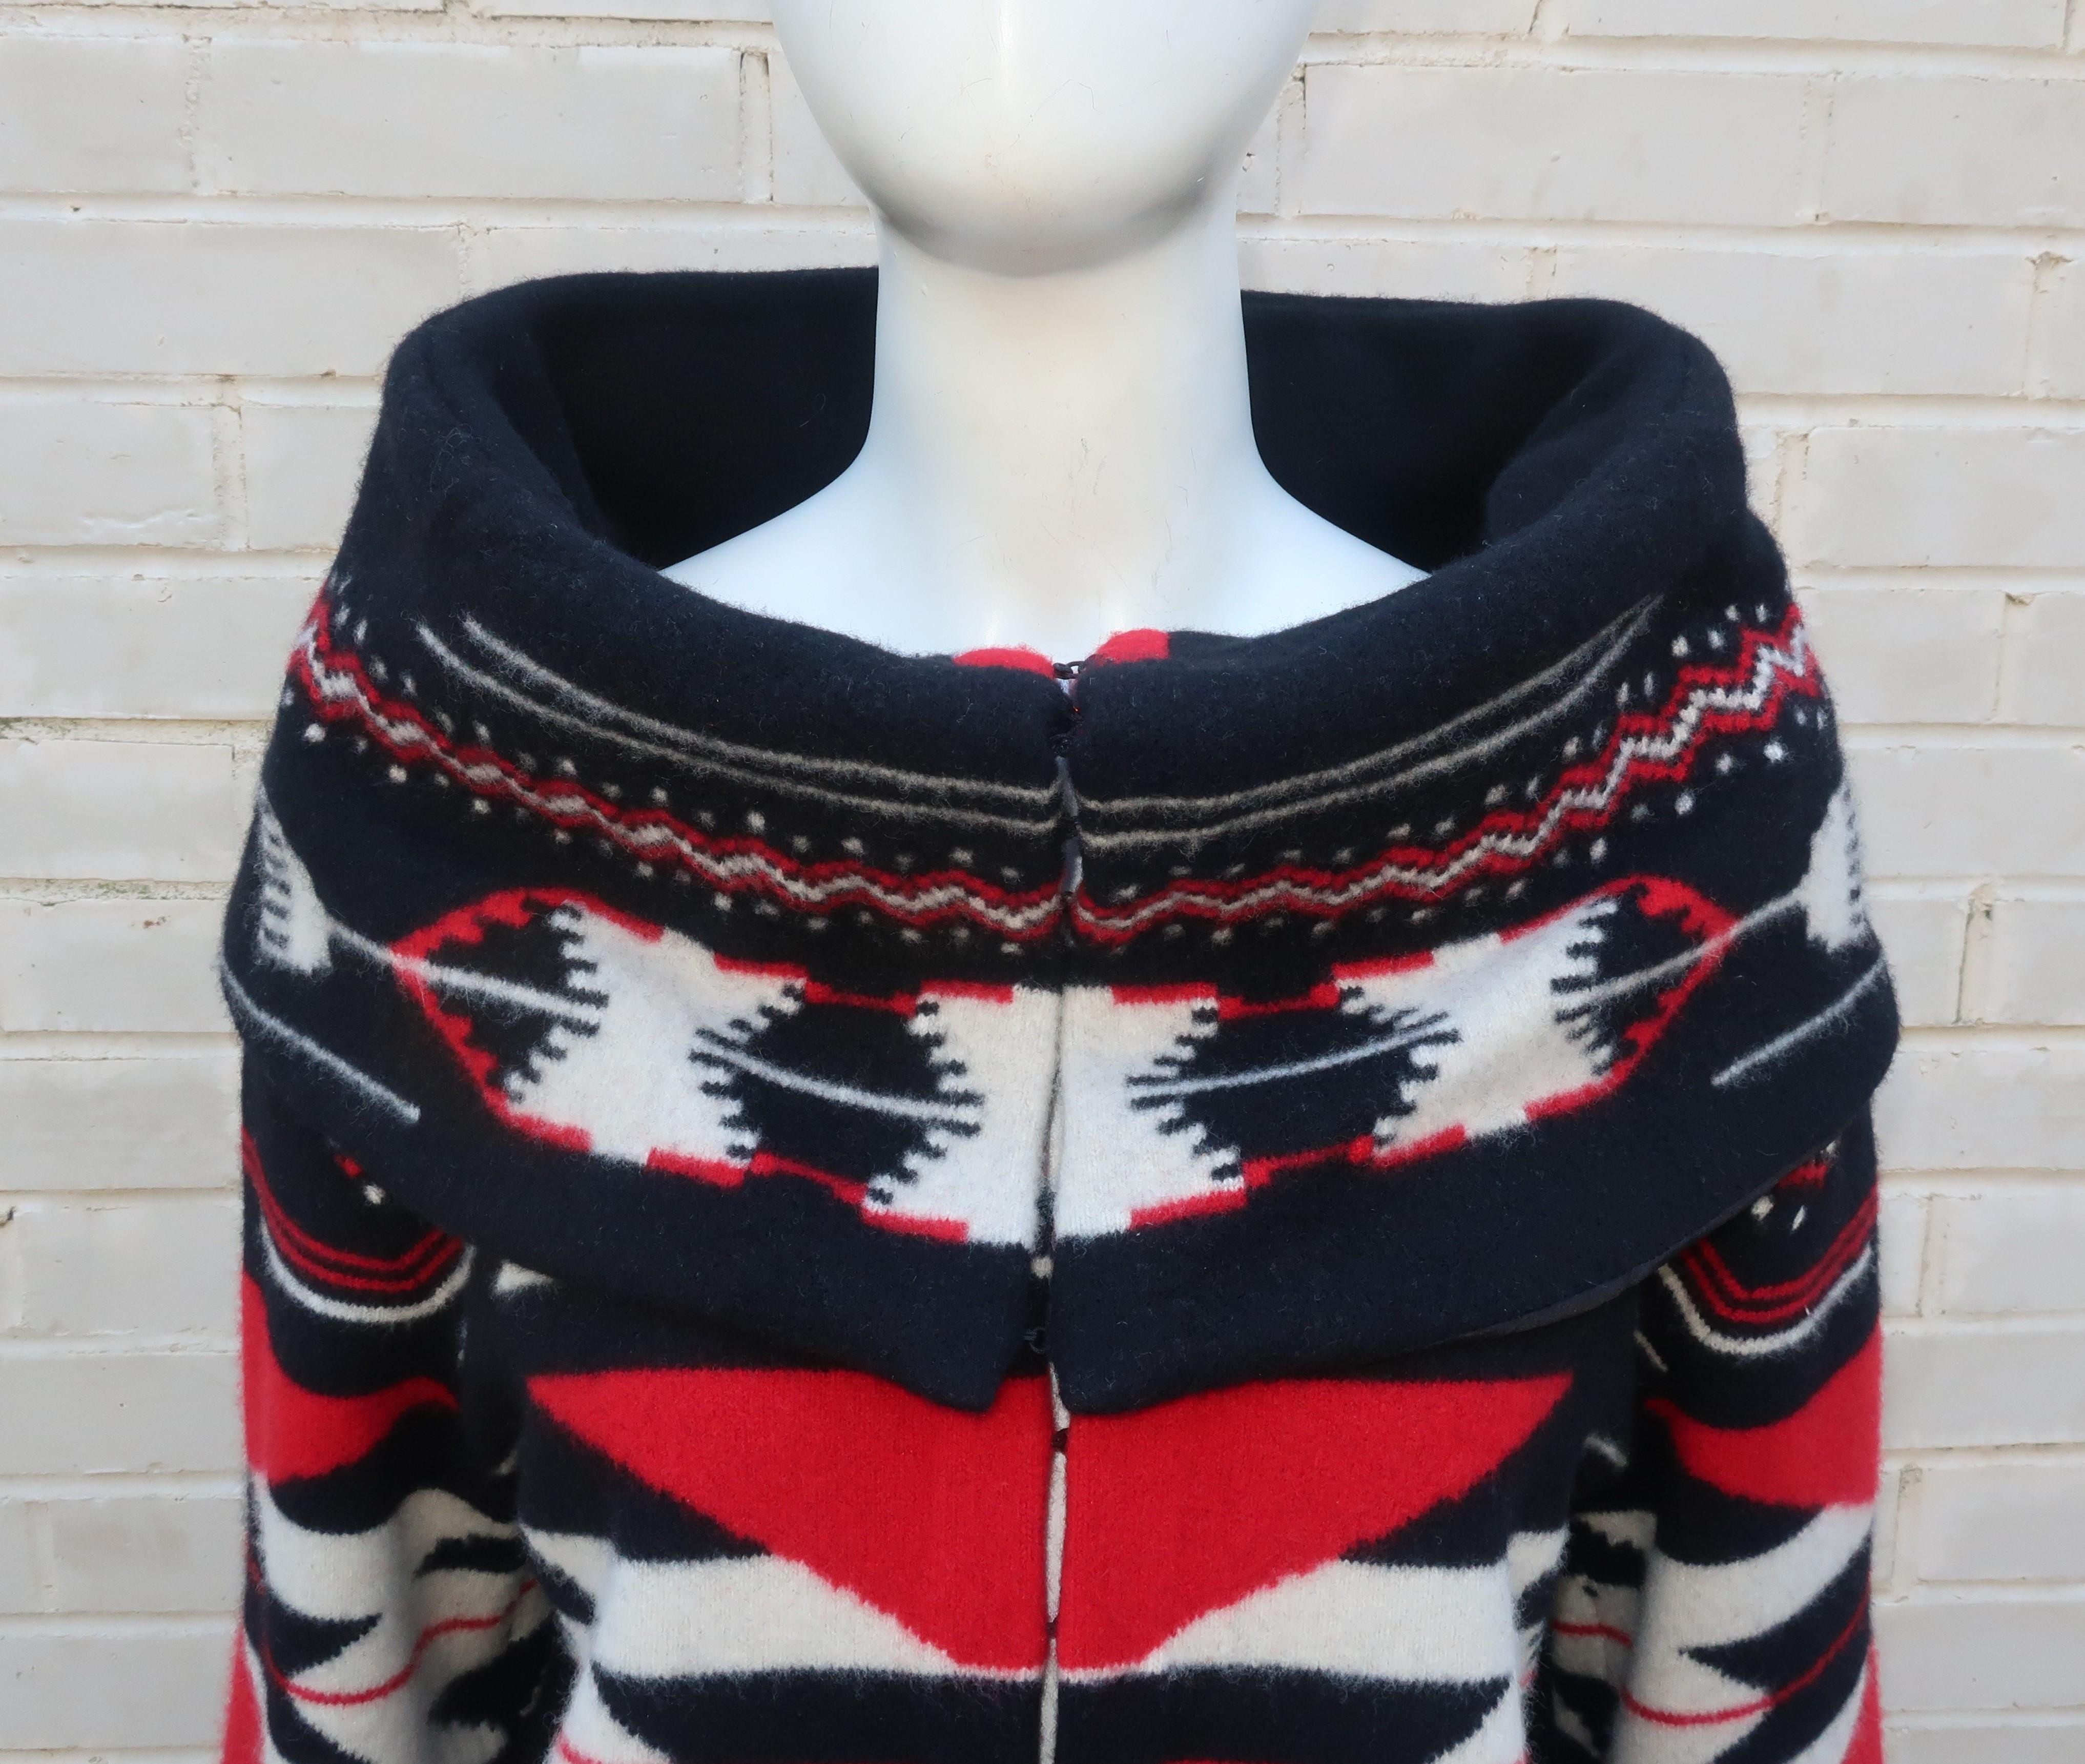 Wrap yourself in Ralph Lauren's cashmere blend sweater inspired by Native American blanket patterns in shades of red, black and white.  The sweater hooks at the front with a dramatic portrait style collar and modified bell sleeves.  The thick wool